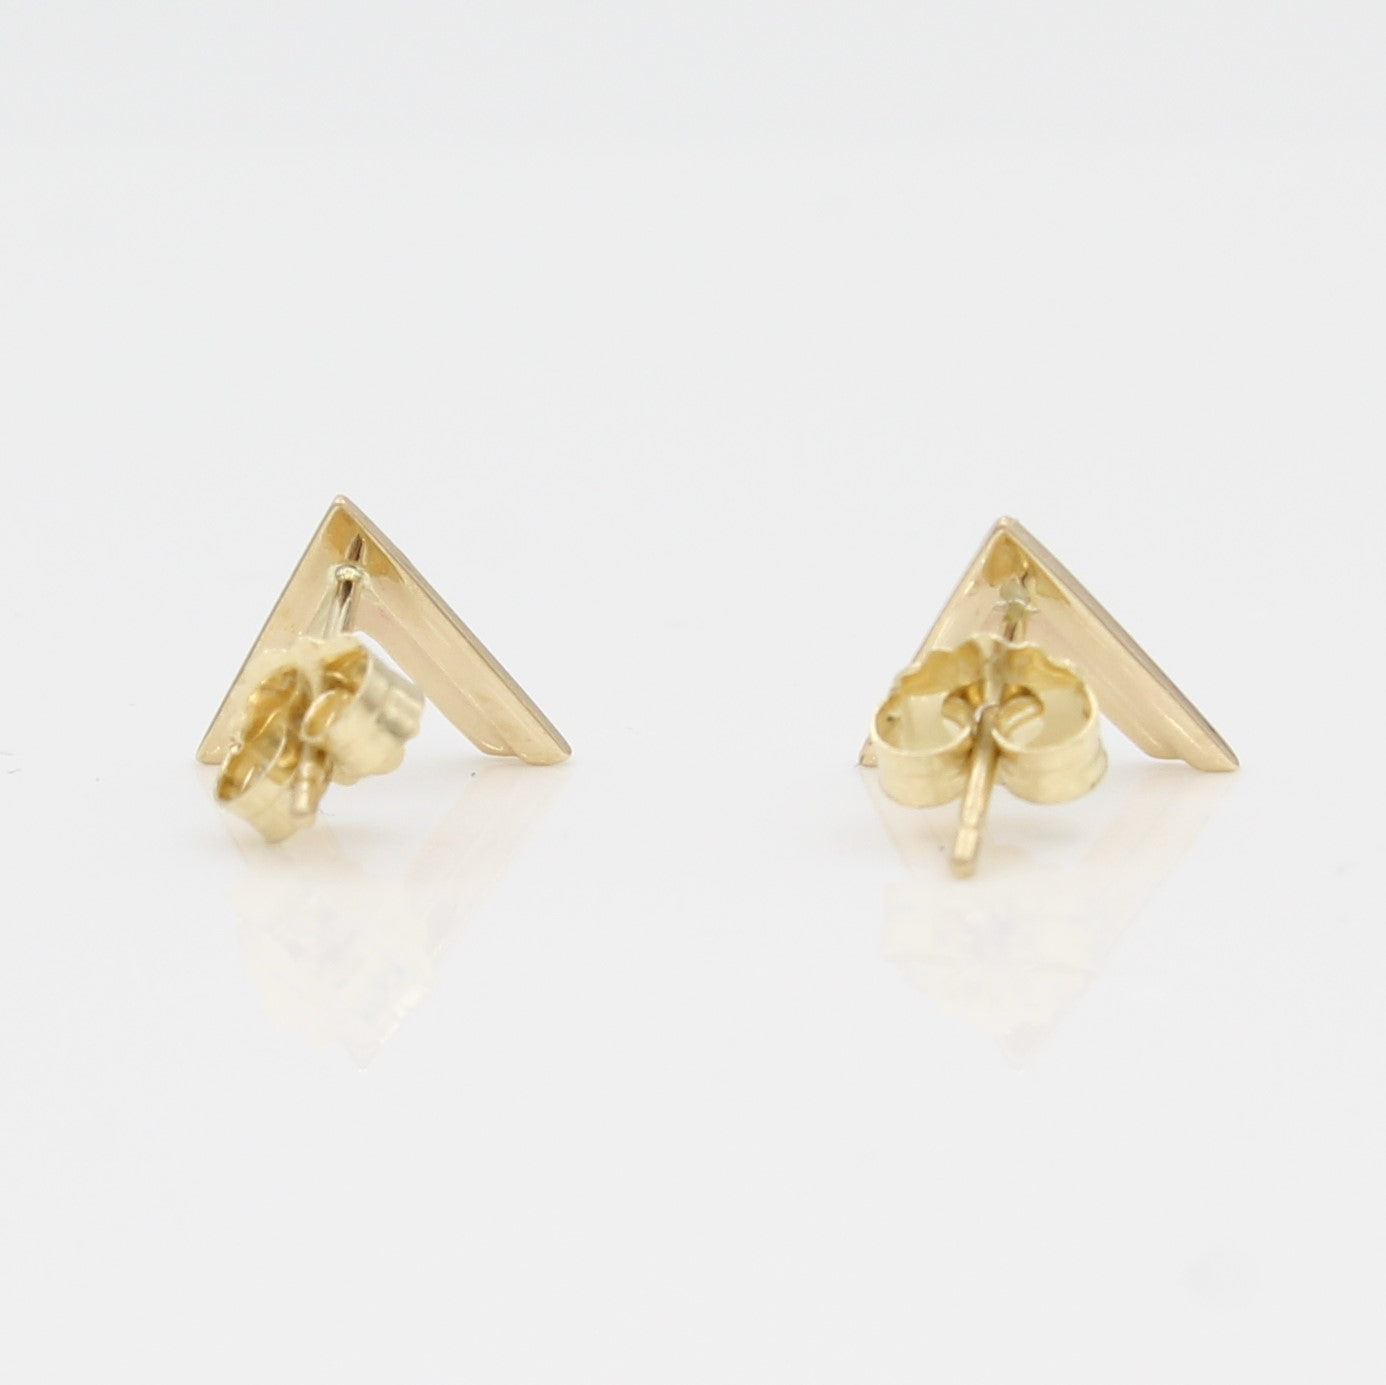 14k Yellow Gold Double Chevron Earrings, back view with a peak at the earring's posts and backs.